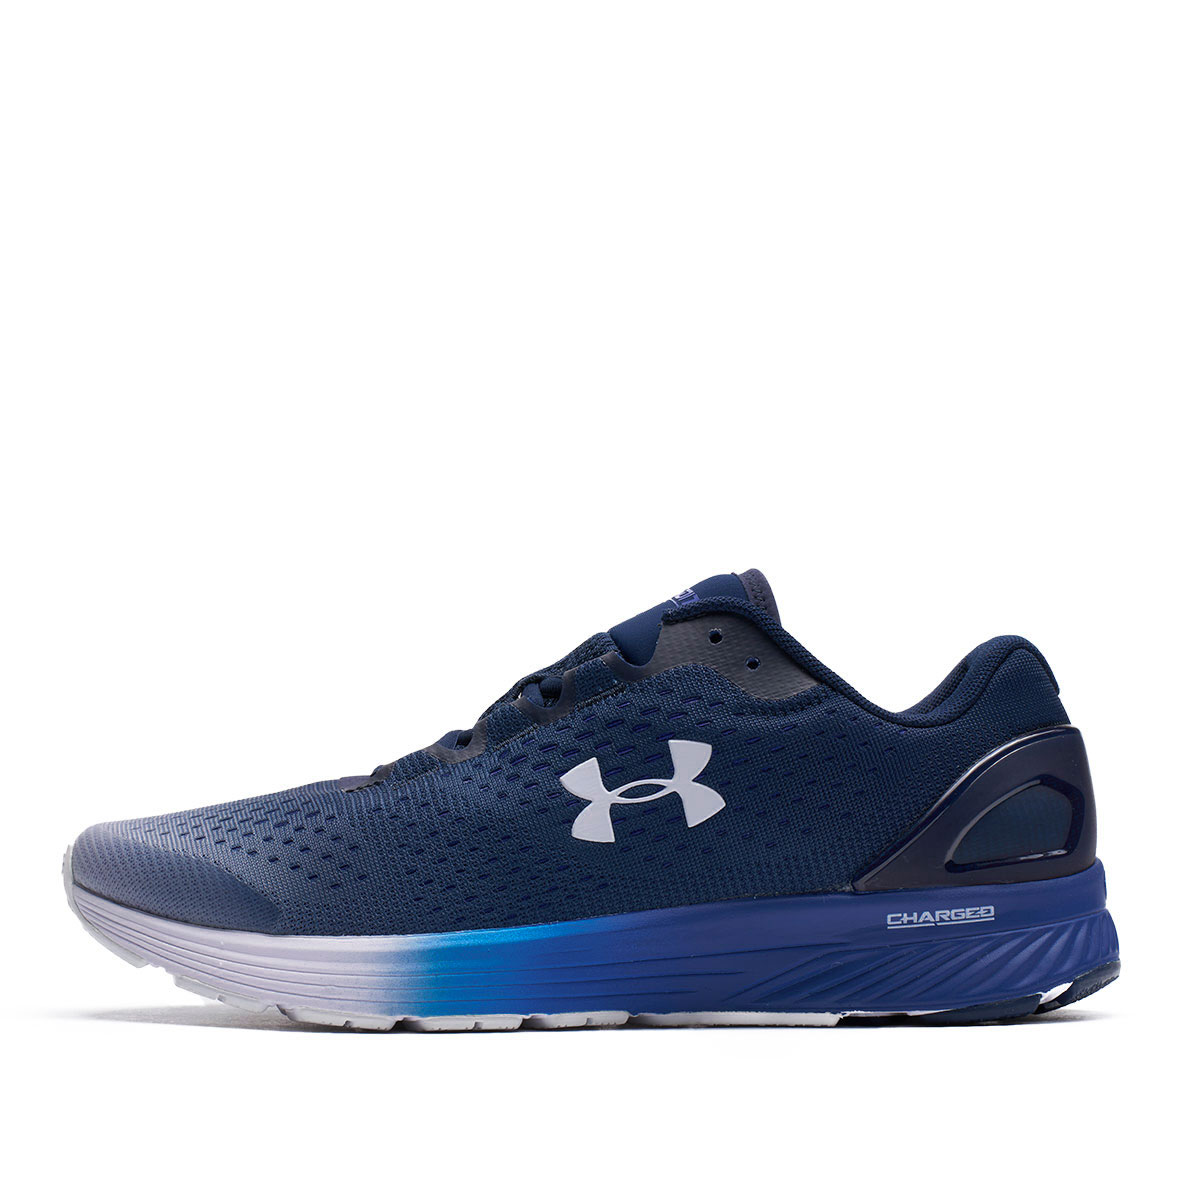 Under Armour Charged Bandit 4  3020319-400